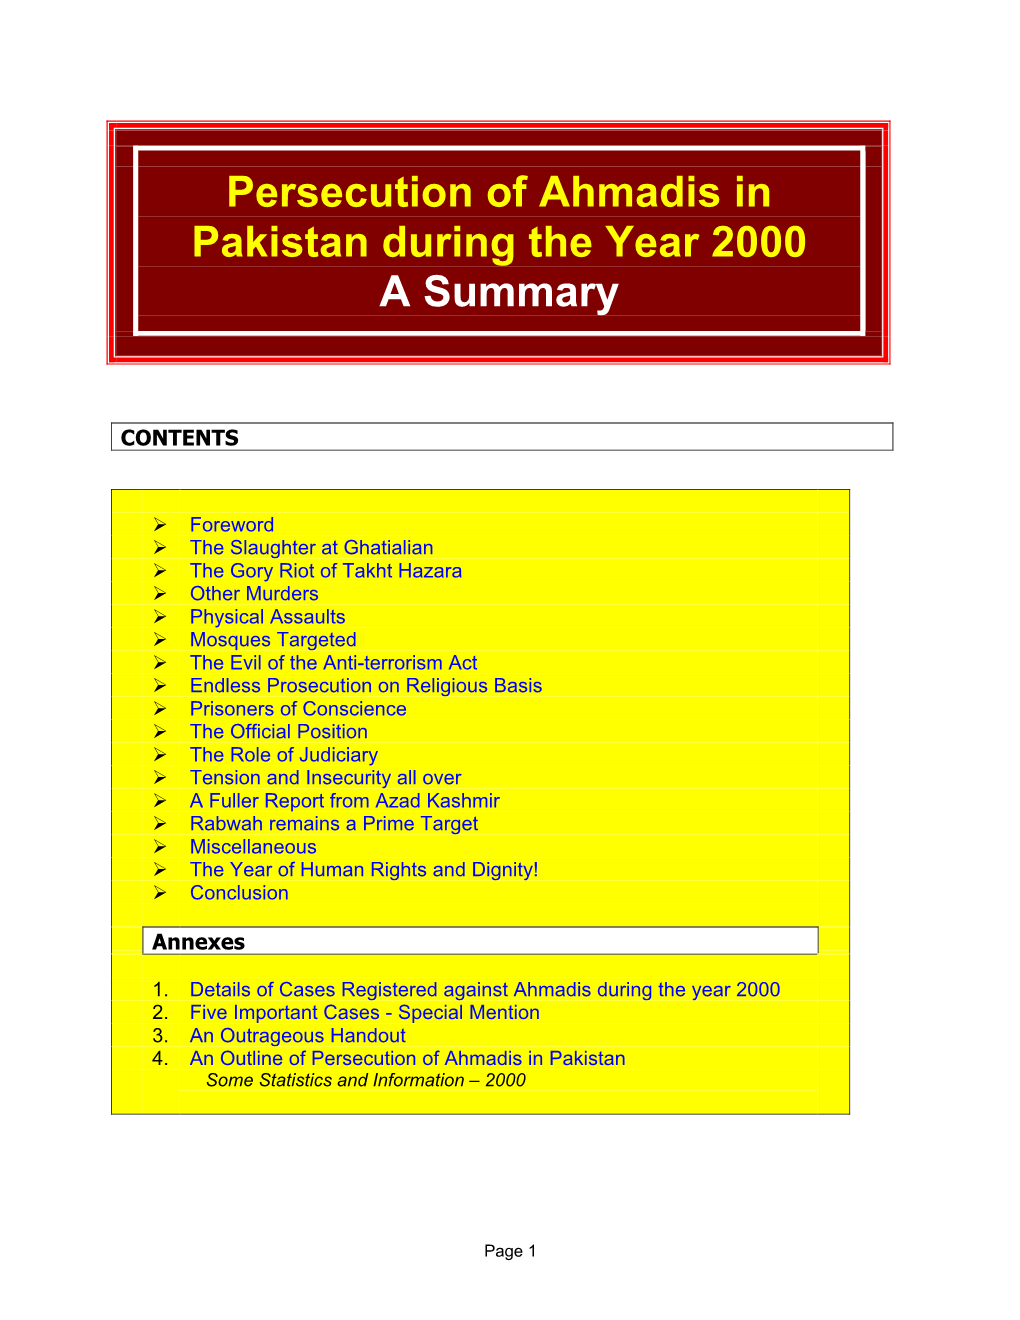 Persecution of Ahmadis in Pakista During the Year 2000